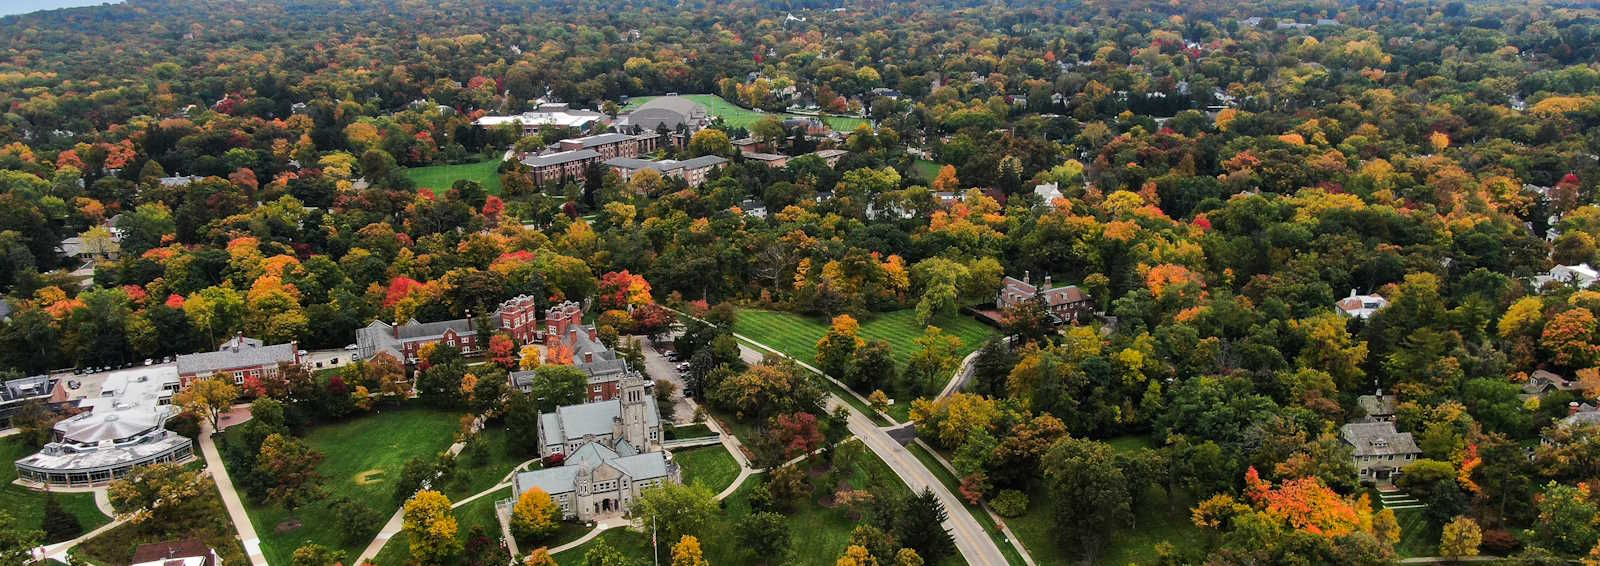 aerial view of campus in the fall